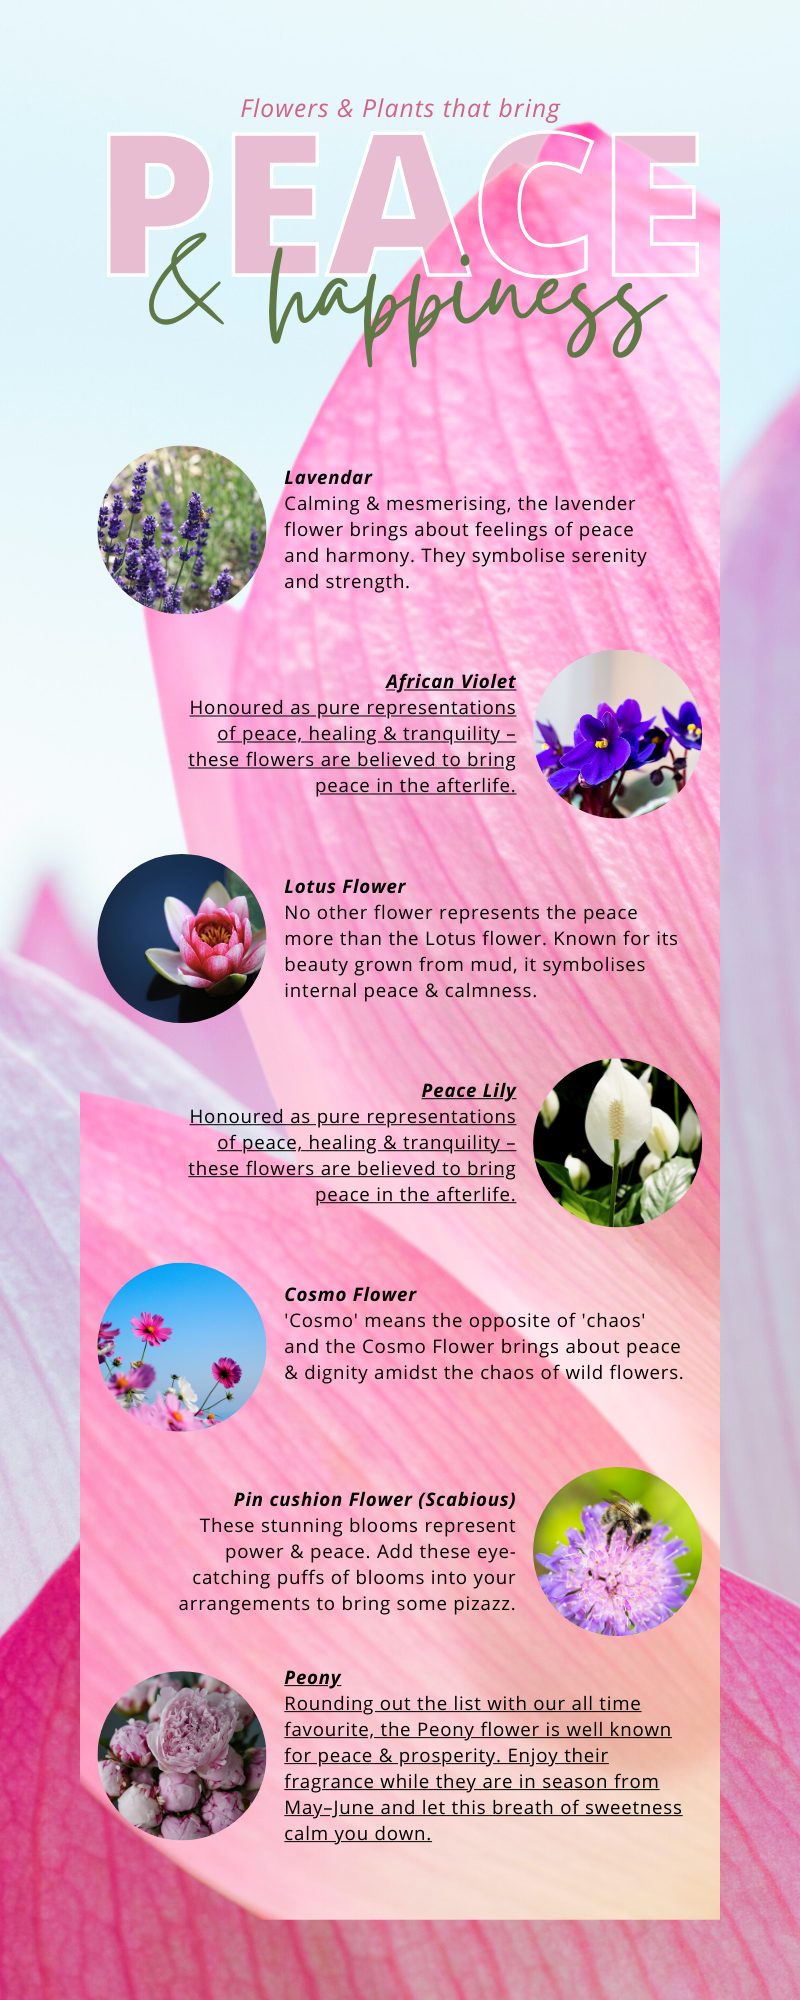 plants and flowers that bring you peace & happiness; lotus flower, peace lily, lavendar, african violets, cosmo flower, pin cushion flower, scabious, peony